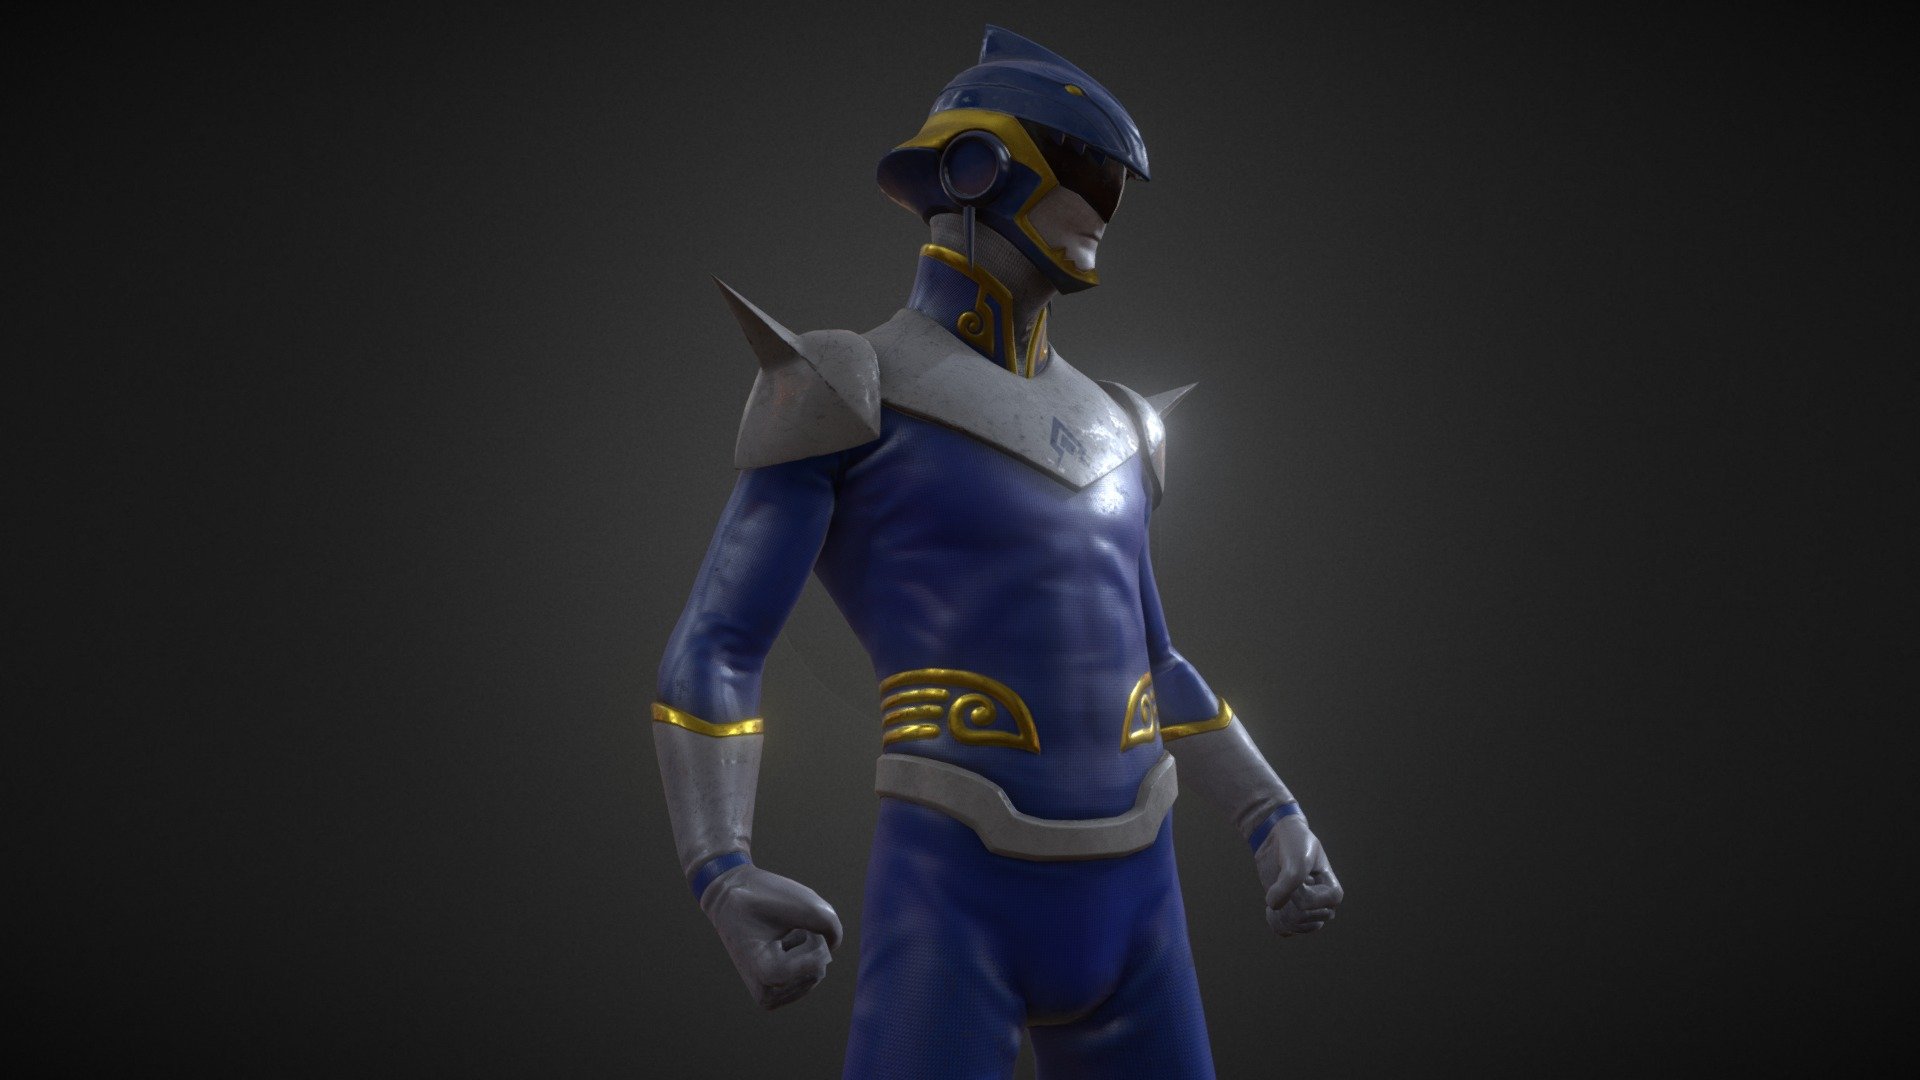 A fan art of a comic character taken from Nusantaranger, created by Sweta Kartika, an Indonesian artist.
Trying to gauge what i can do in a week. Next time should be better.
At least it is finished, not perfect :D - Nusantaranger Blue - 3D model by gagawaq 3d model